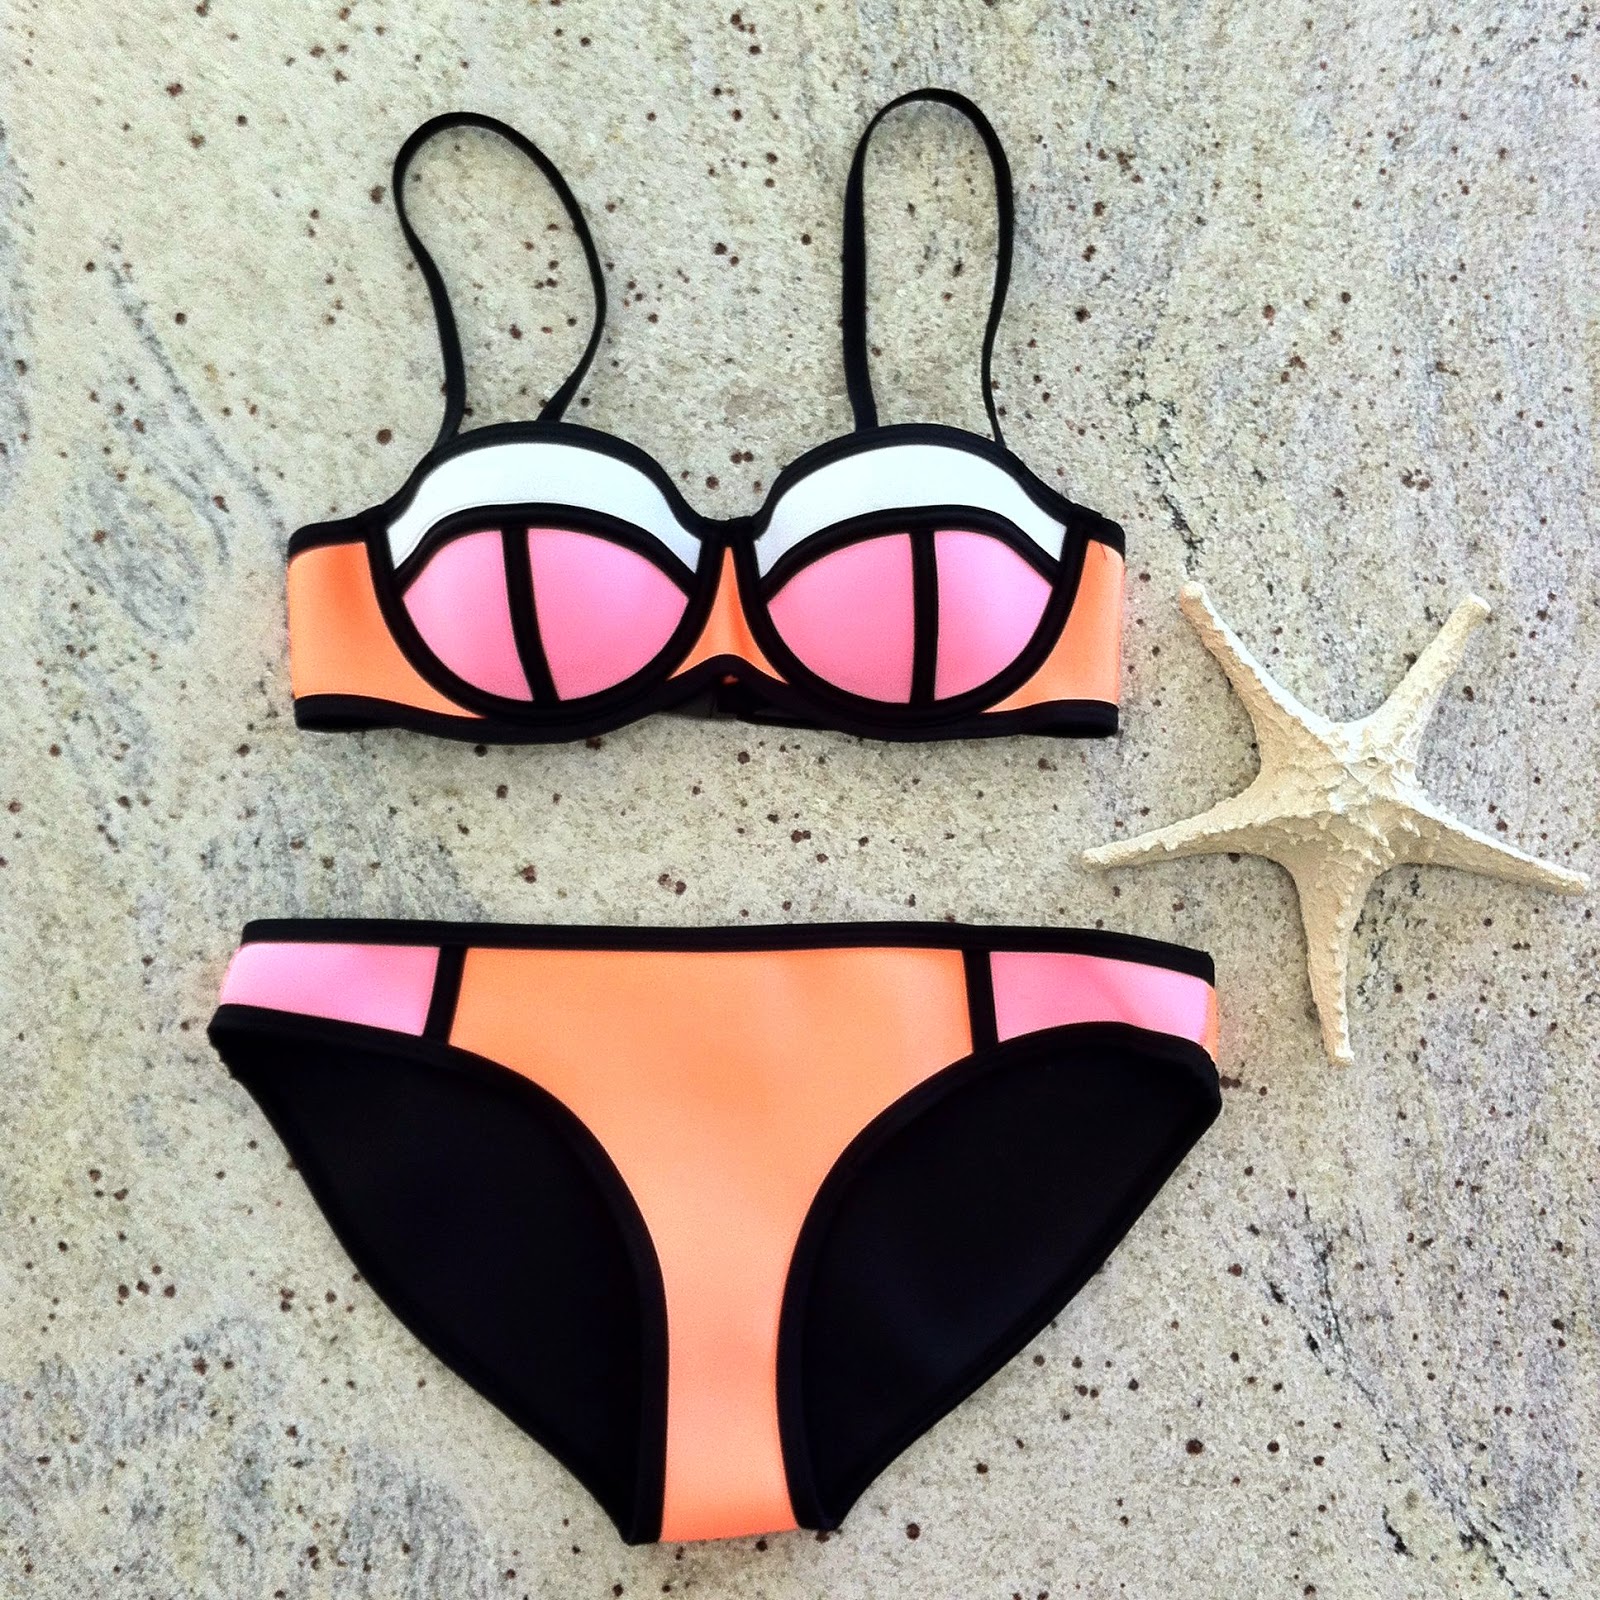 Rentmeester plotseling Boodschapper Sincerely Miss Ash: TRIANGL SWIMWEAR REVIEW